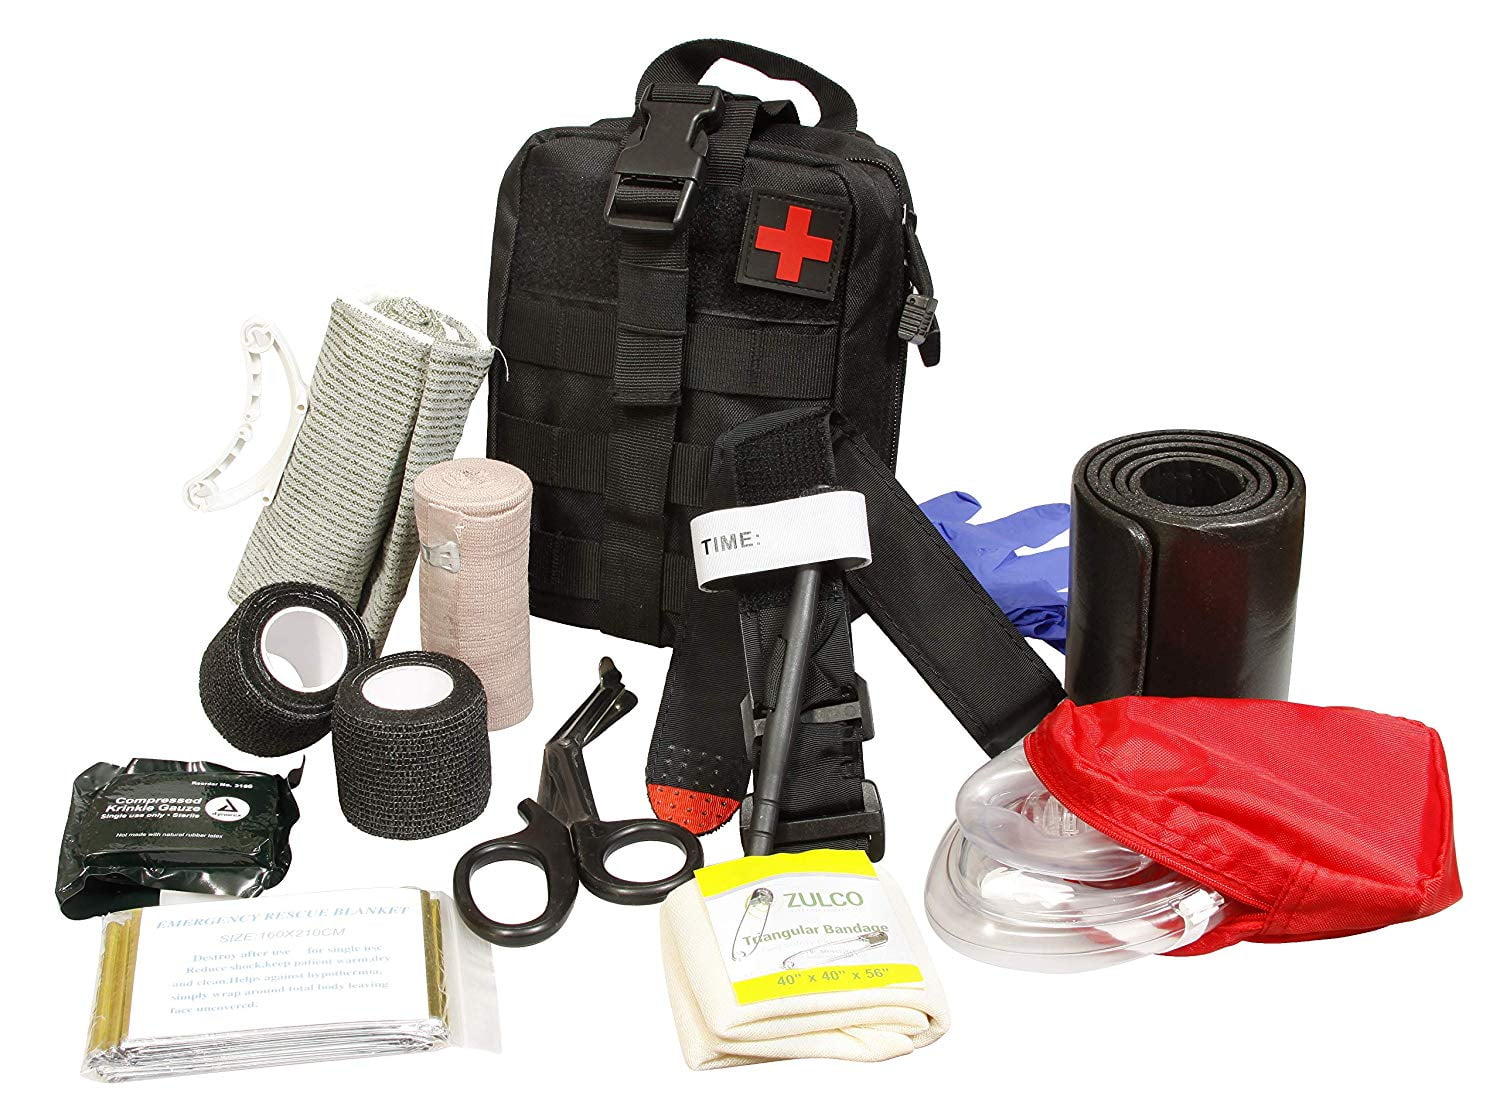 EMERGENCY SURVIVAL TRAUMA MEDICAL KIT W MOLLE POUCH TOURNIQUET FIRST AID BAG US 